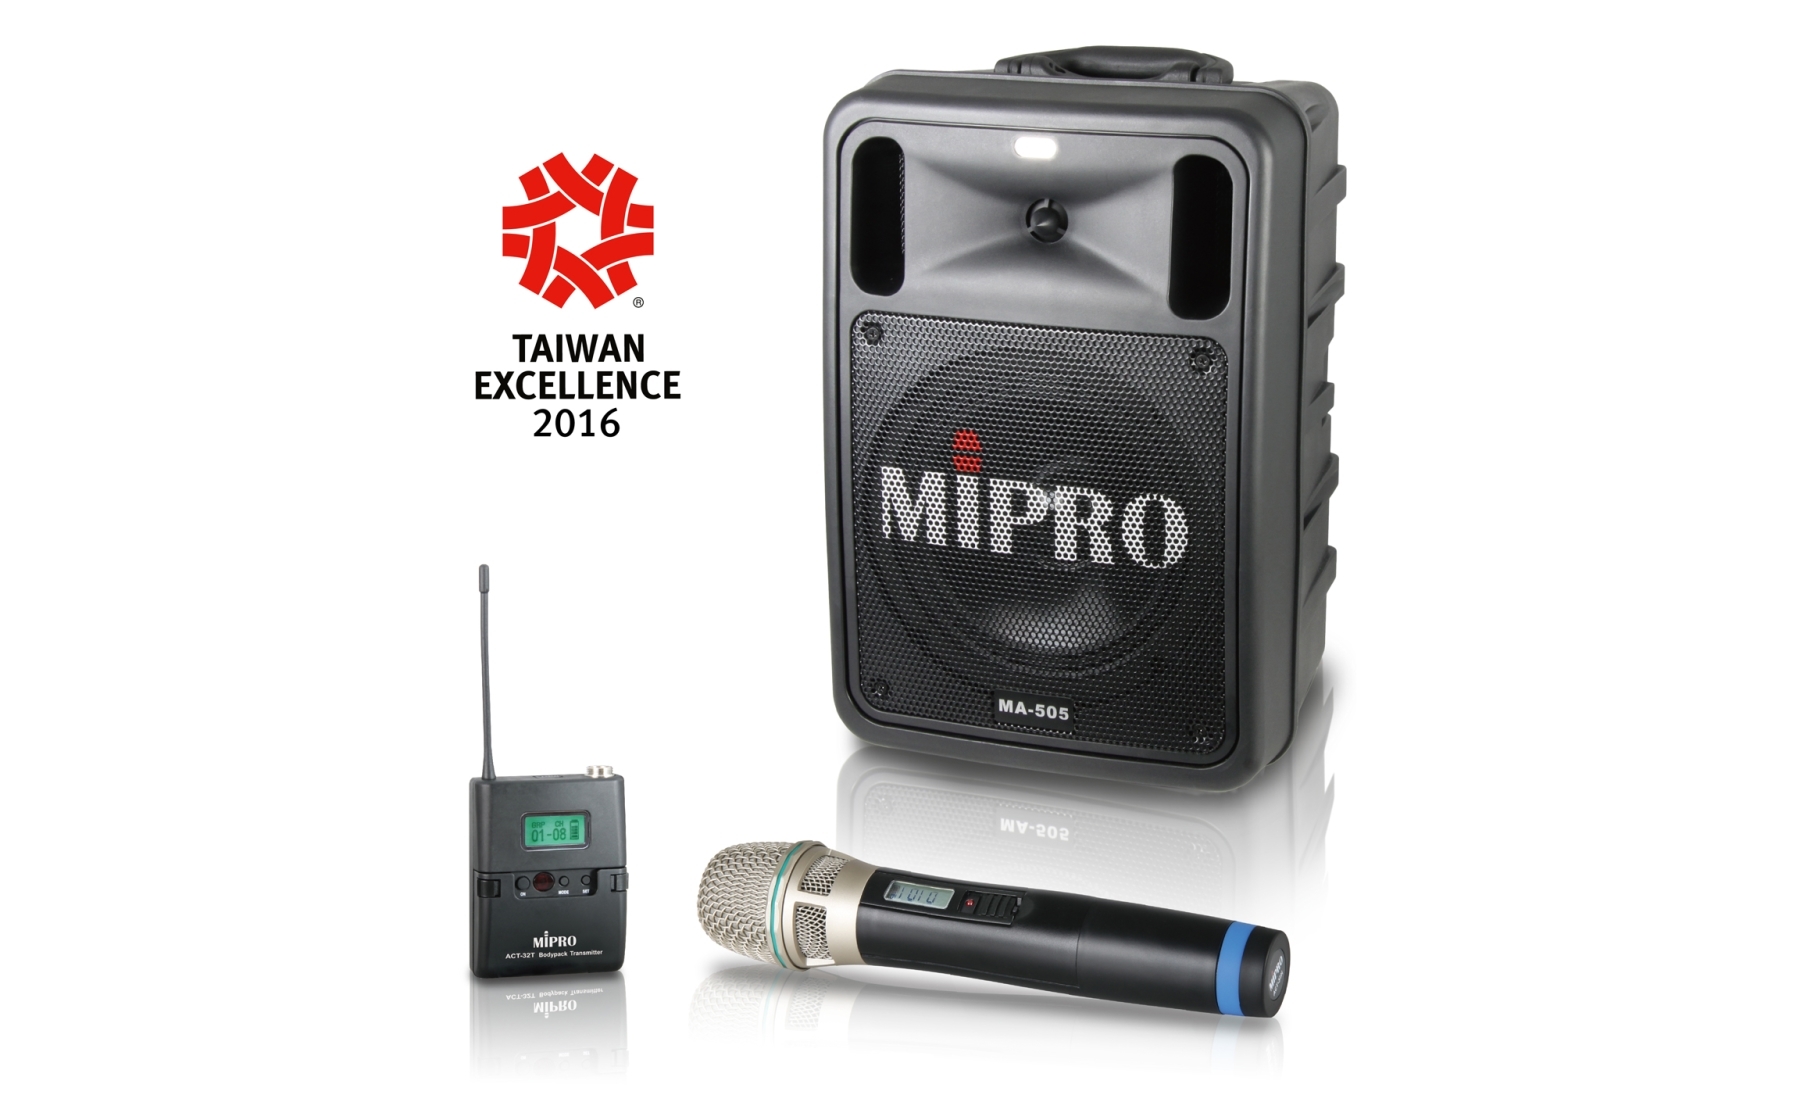 MIPRO MA Portable Wireless PA System Wins Taiwan Excellence Award